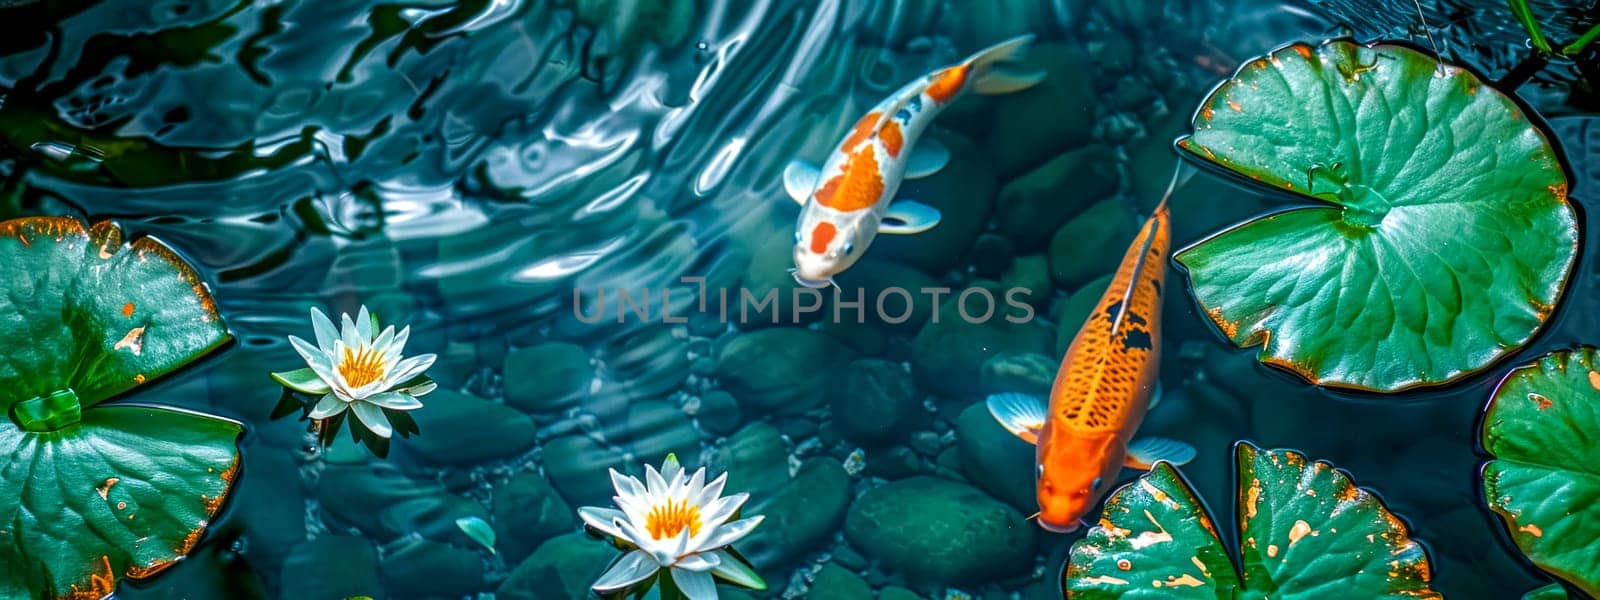 Serene koi pond with water lilies by Edophoto